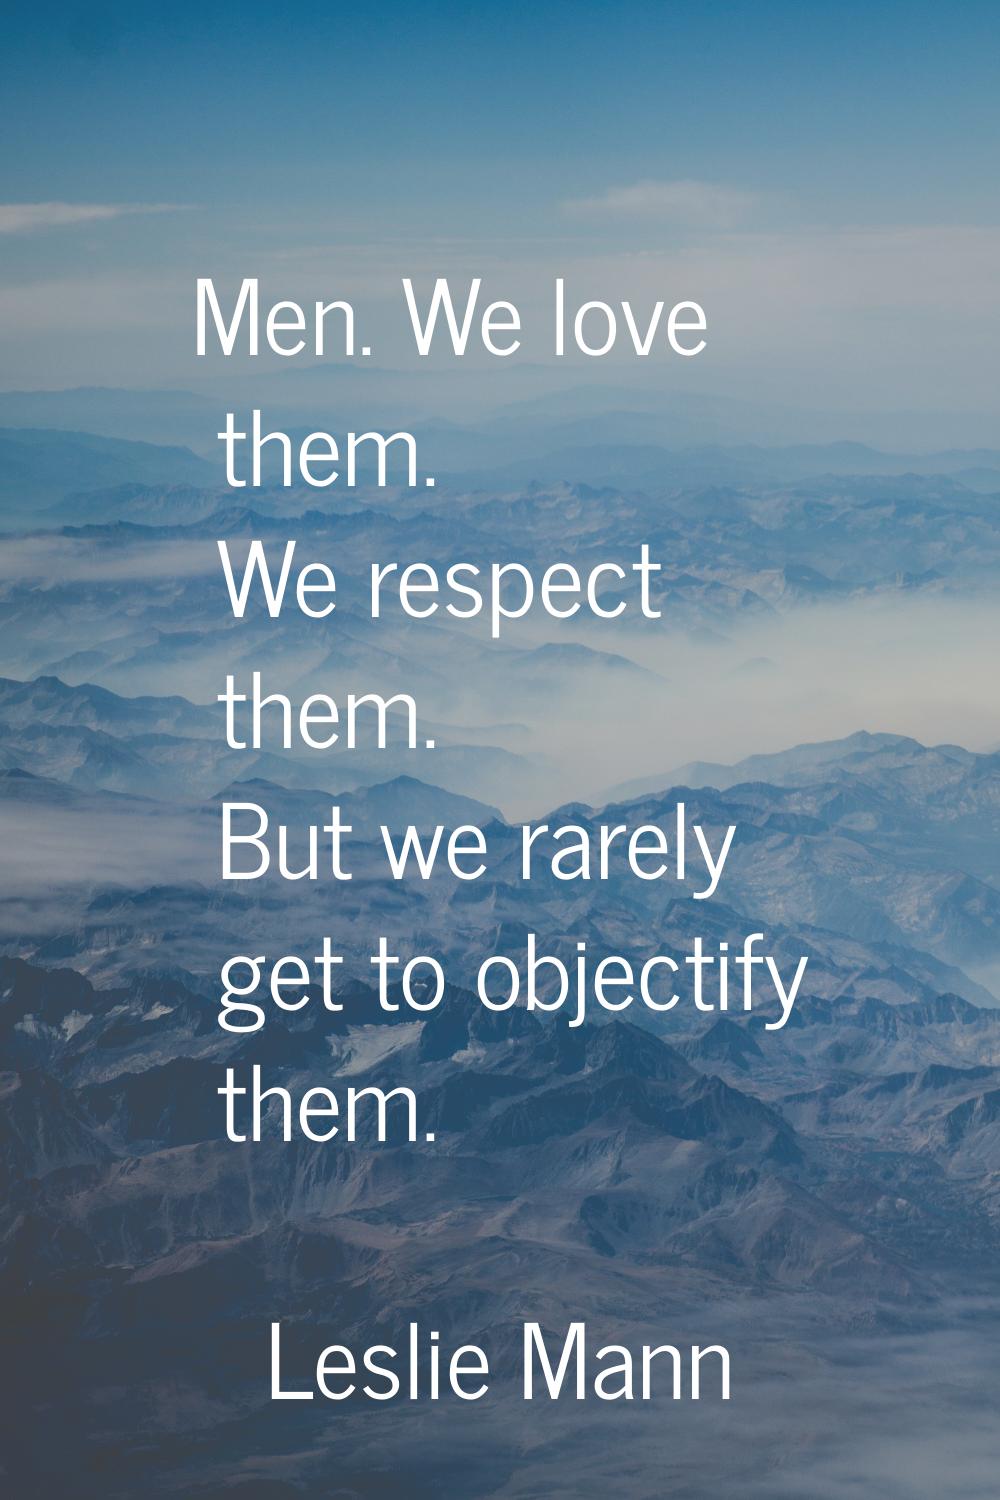 Men. We love them. We respect them. But we rarely get to objectify them.